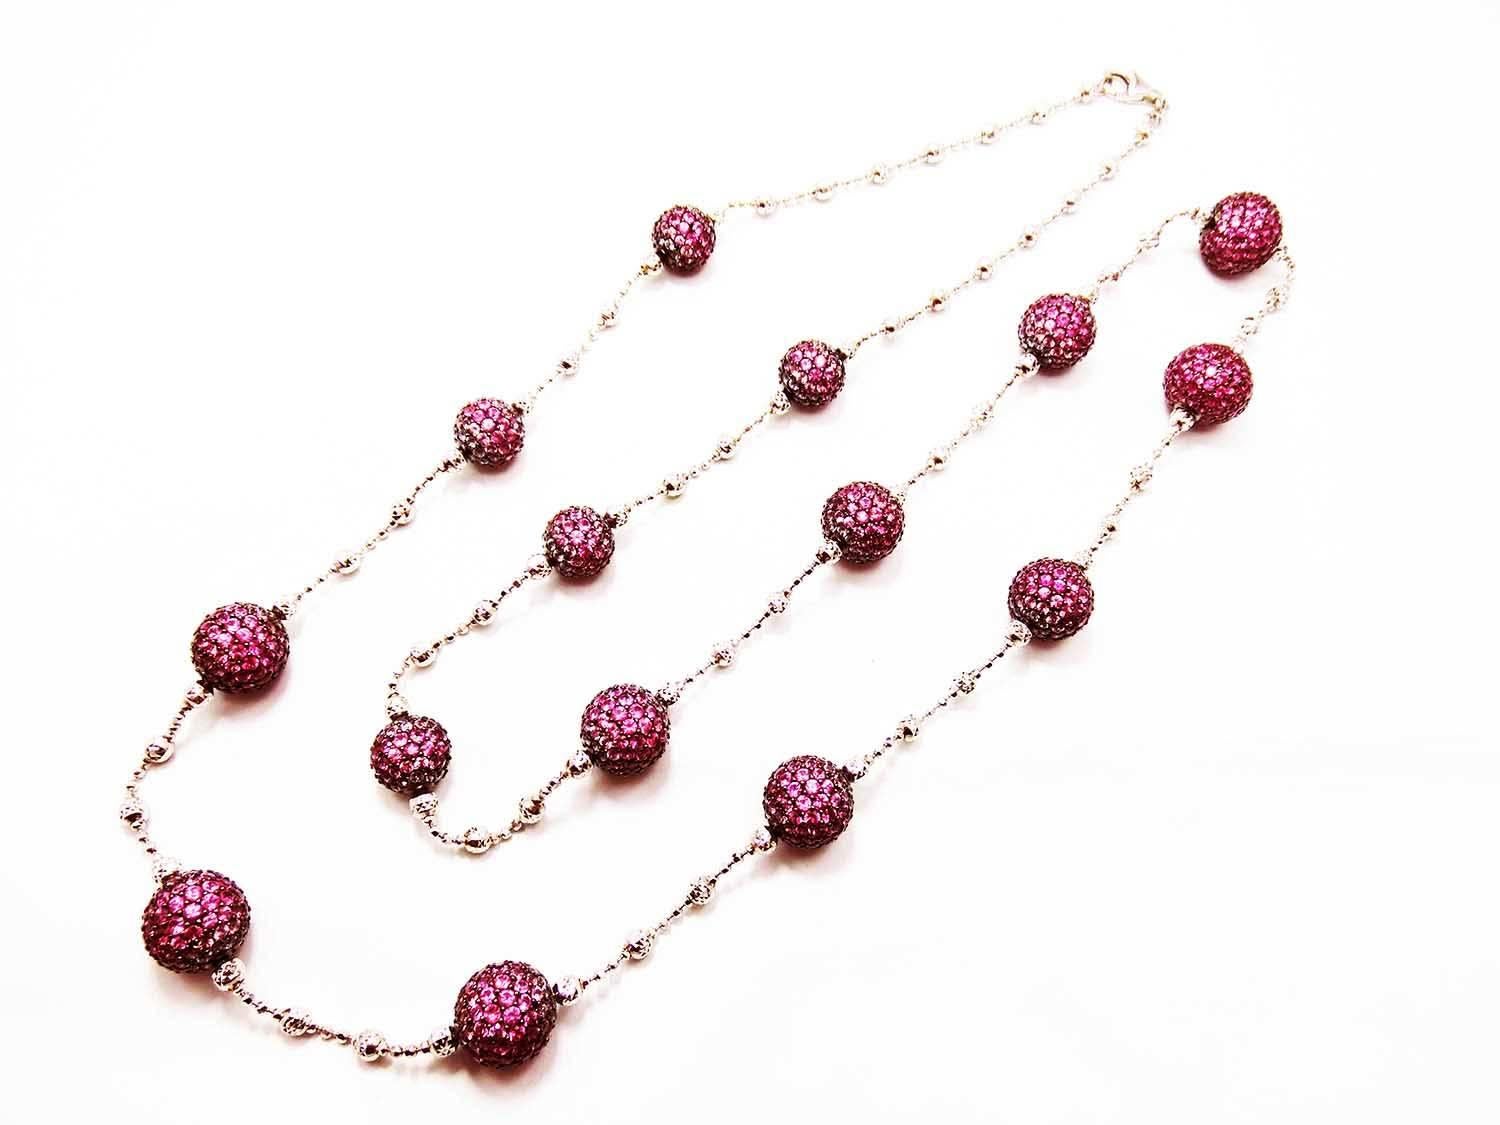 Graduated color sapphire ball necklace made in 18k white gold .We graduated color sapphire ball to make it look soft and sweet .It will look sweet form light to dark.sWe also graduated the size of all ball too. You can use long chain as many